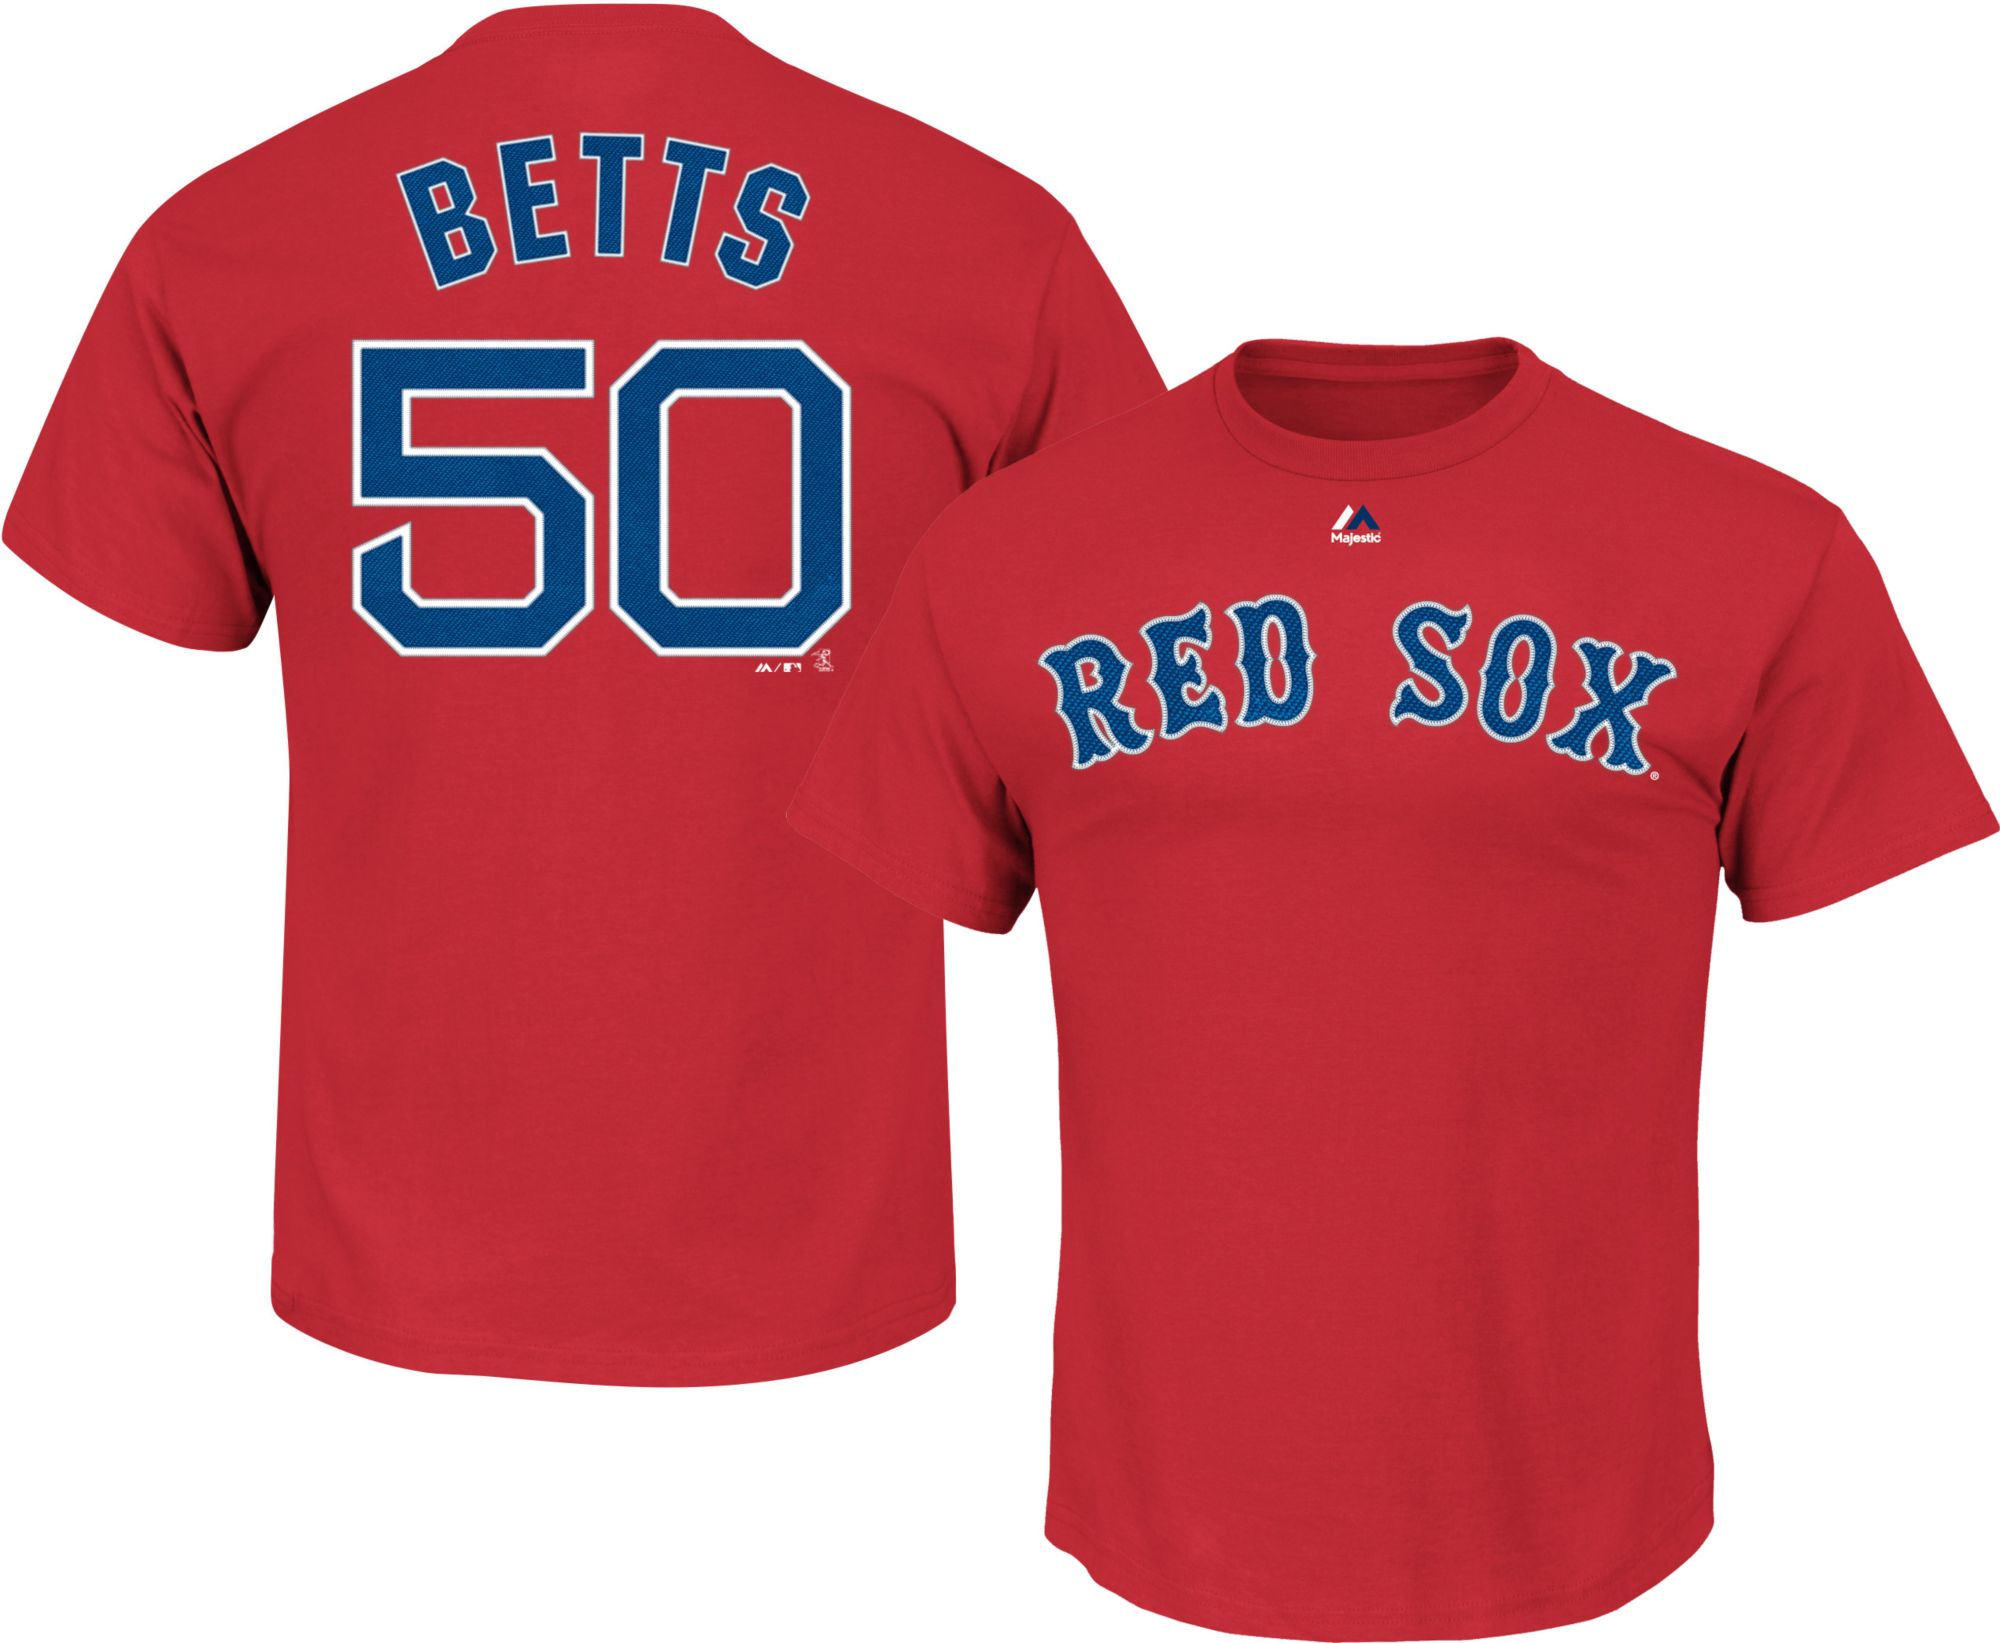 youth red sox jersey